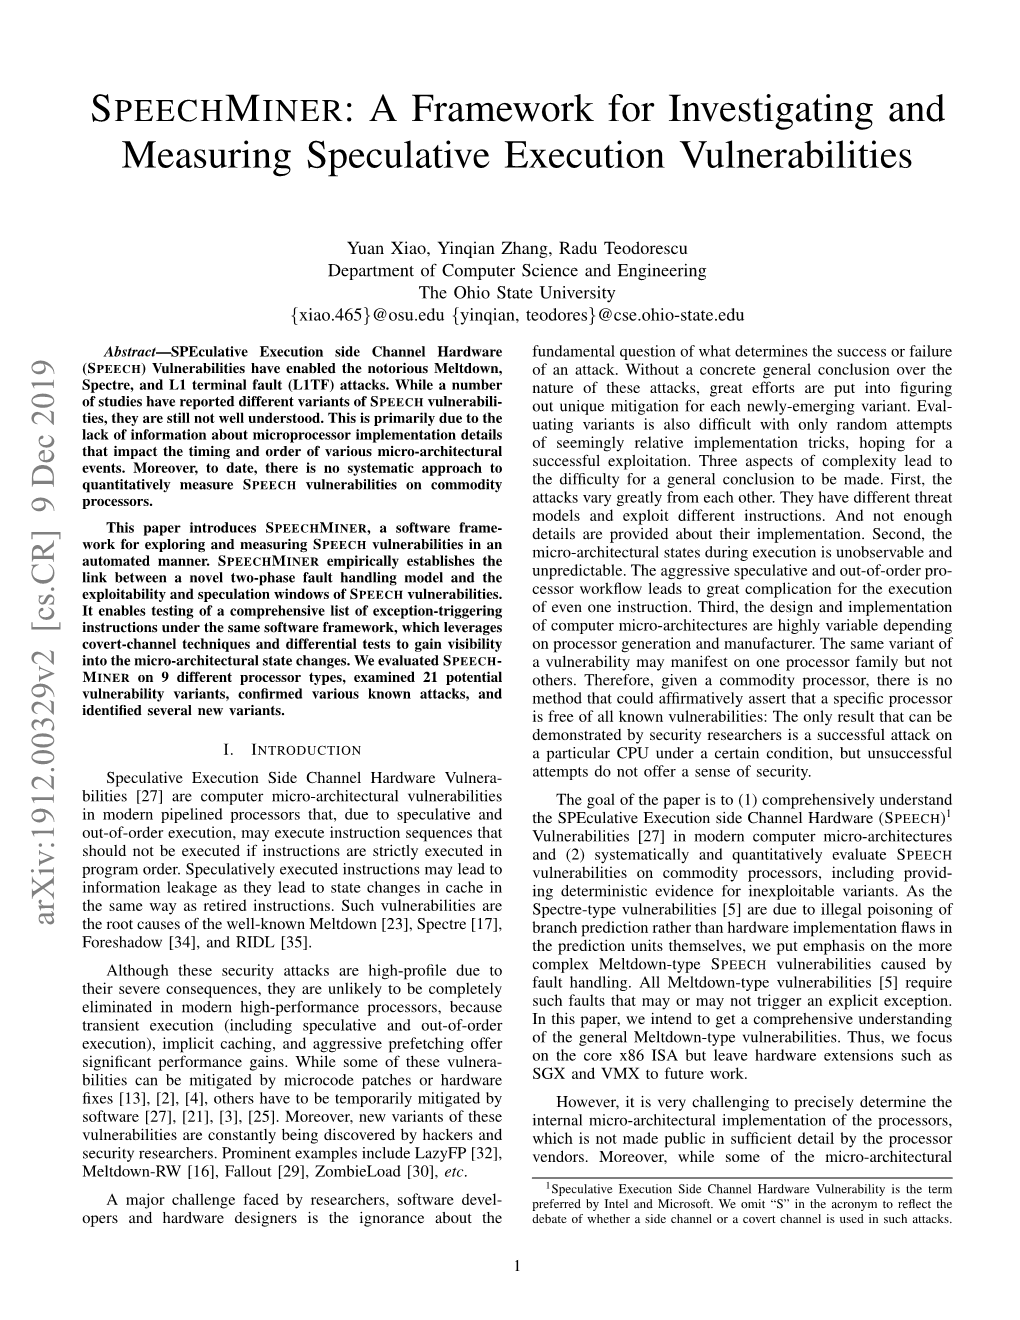 A Framework for Investigating and Measuring Speculative Execution Vulnerabilities